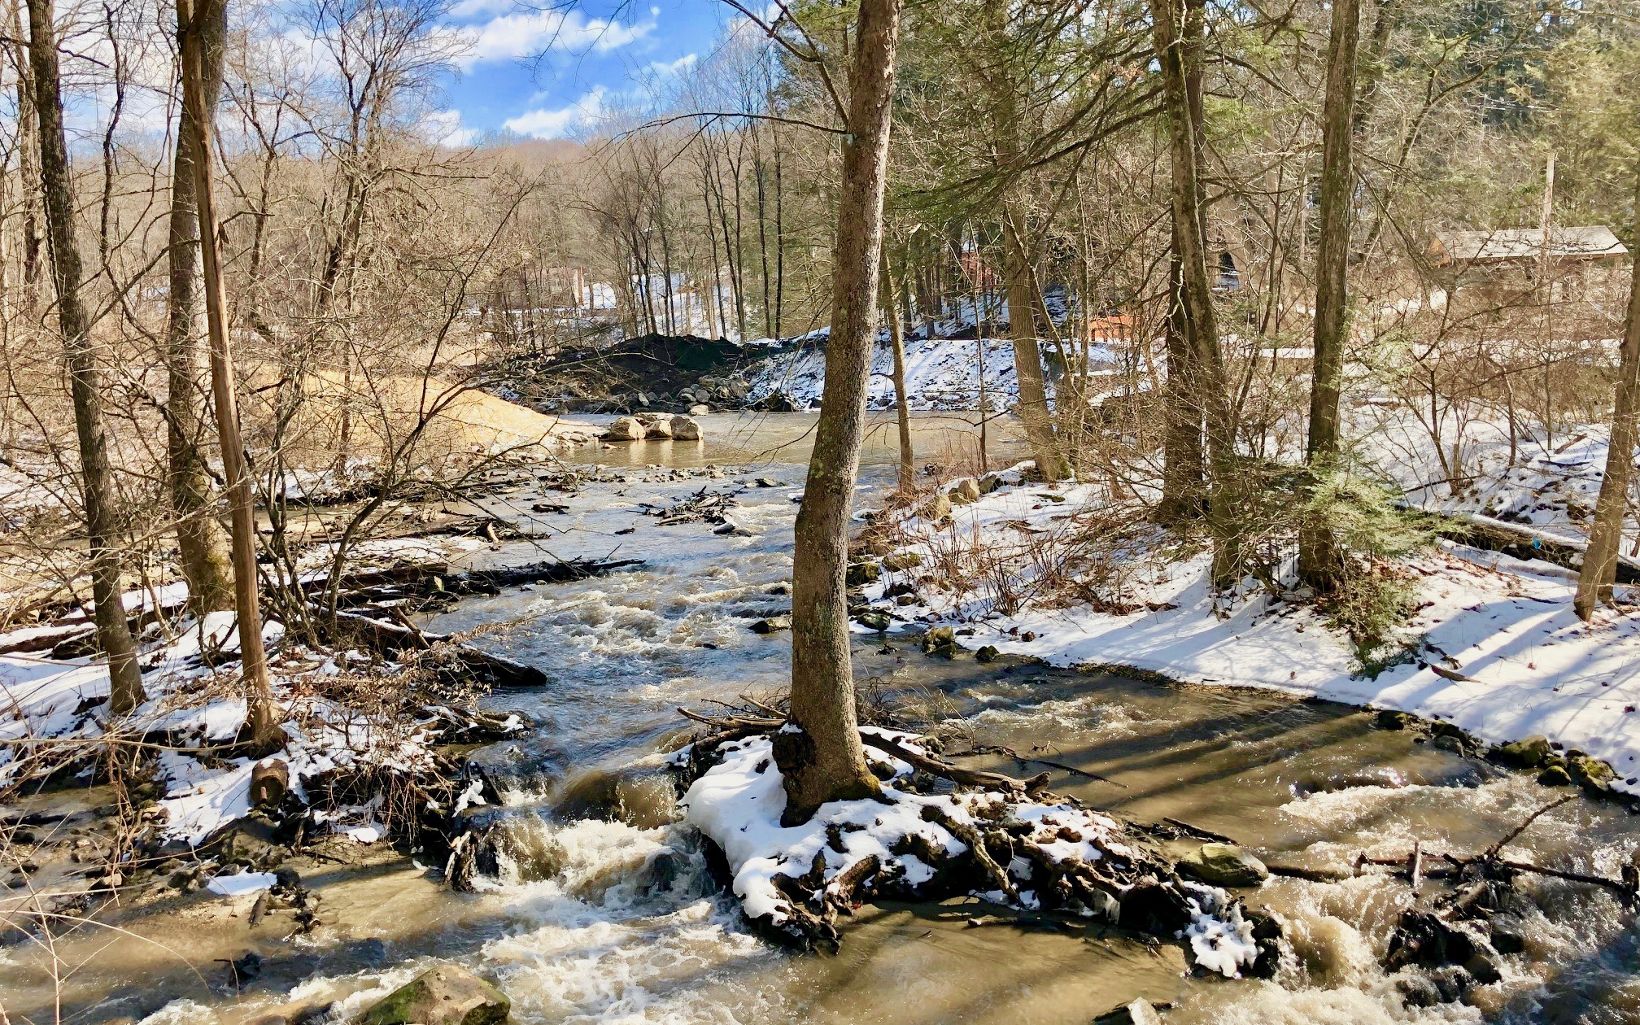 Looking upstream, the river runs free! The boulders will be moved and the root wads have been added to stabilize the bank and create instream habitat.